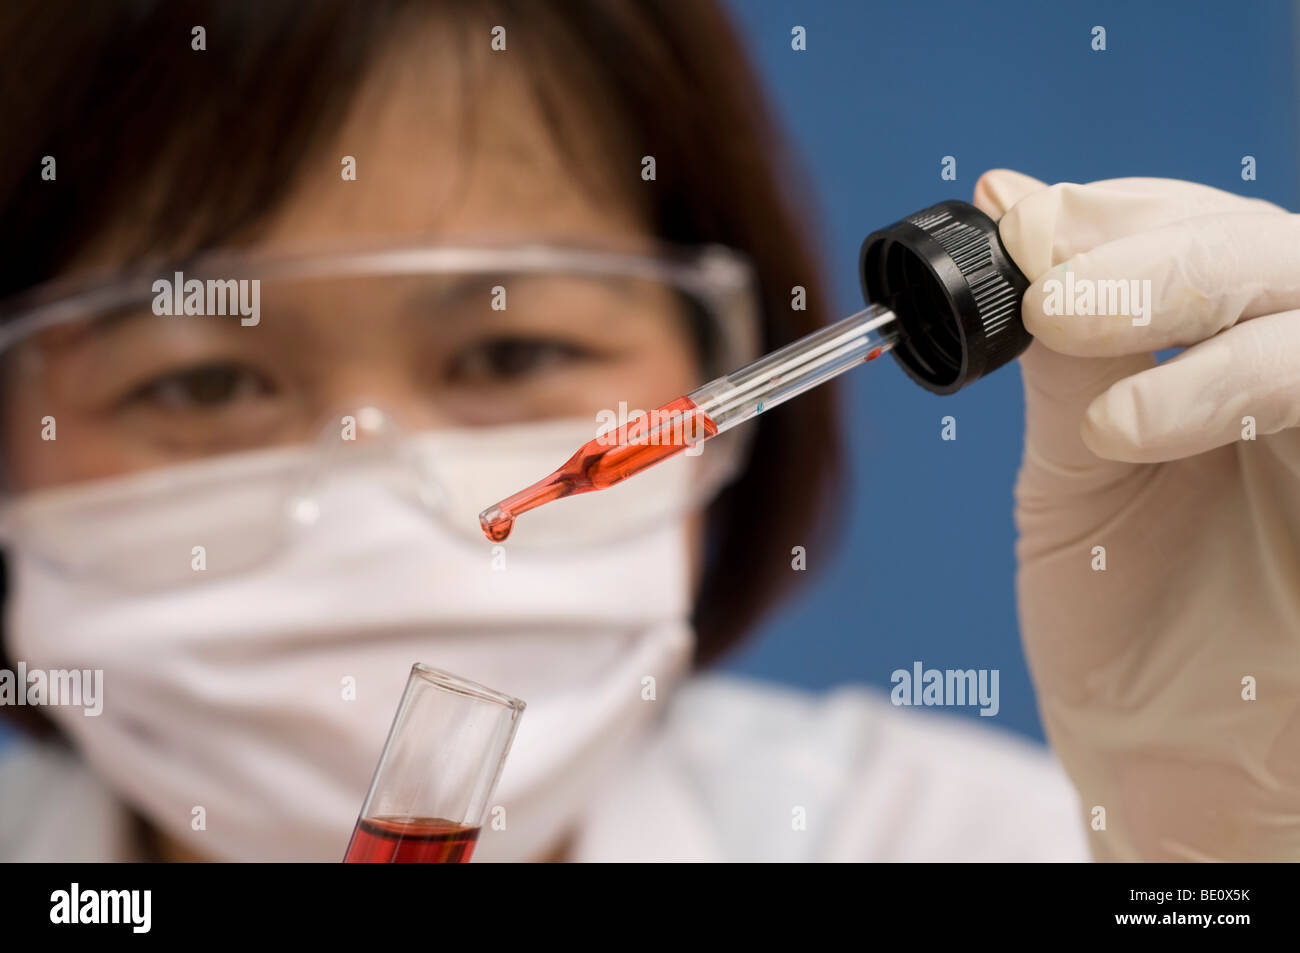 Scientist in medical research Laboratory Stock Photo